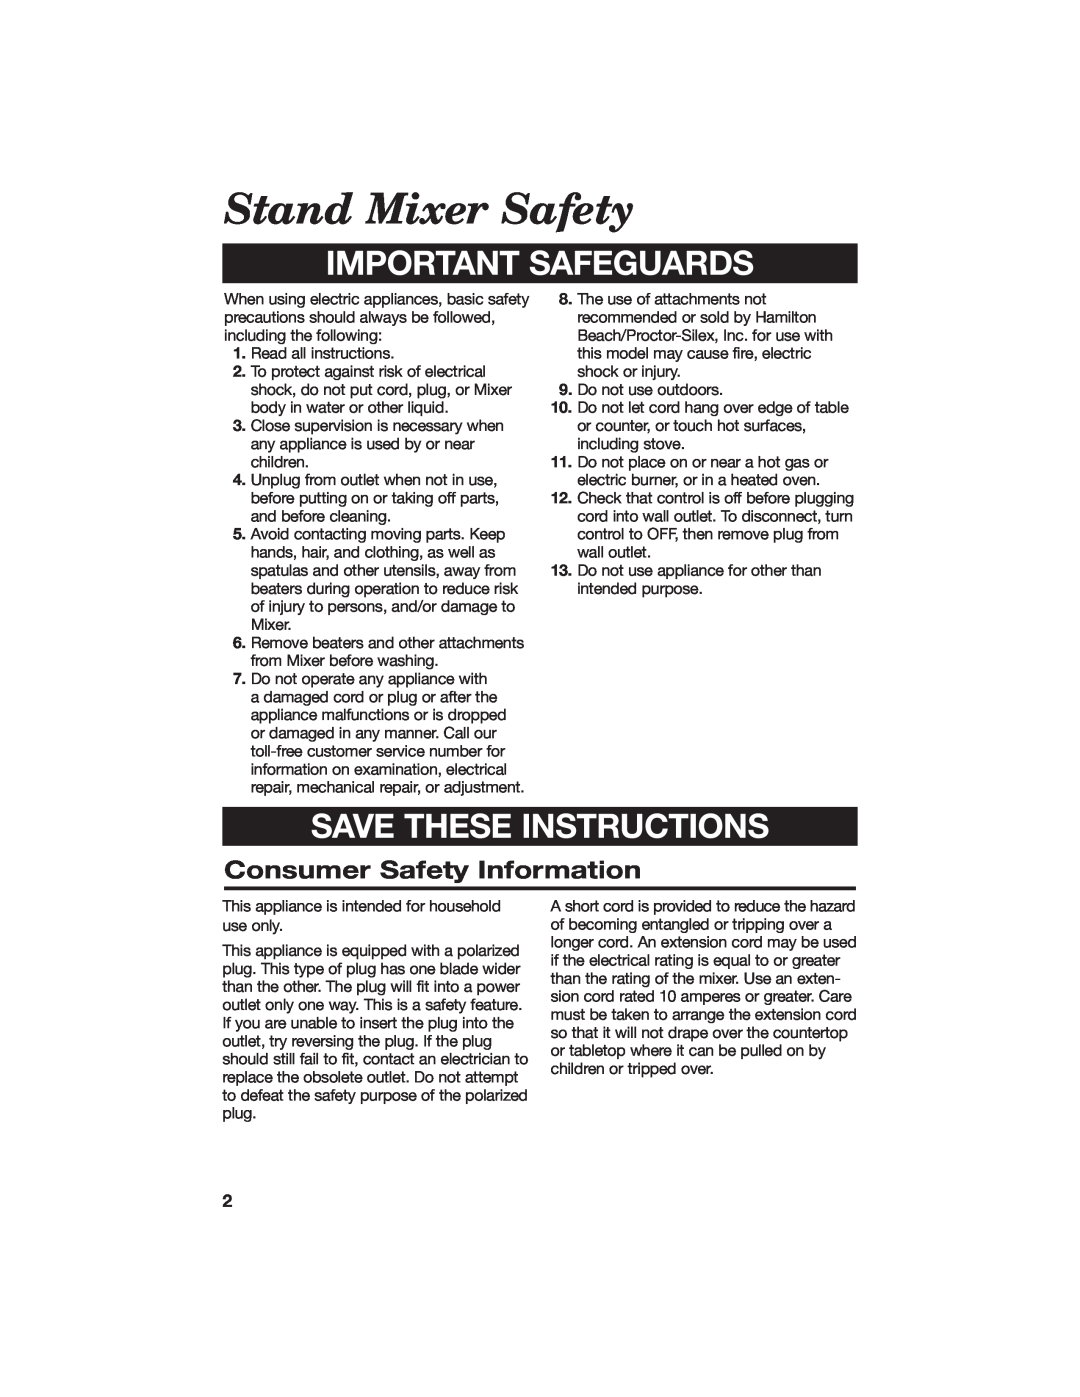 Hamilton Beach 840056500 Stand Mixer Safety, Consumer Safety Information, Important Safeguards, Save These Instructions 